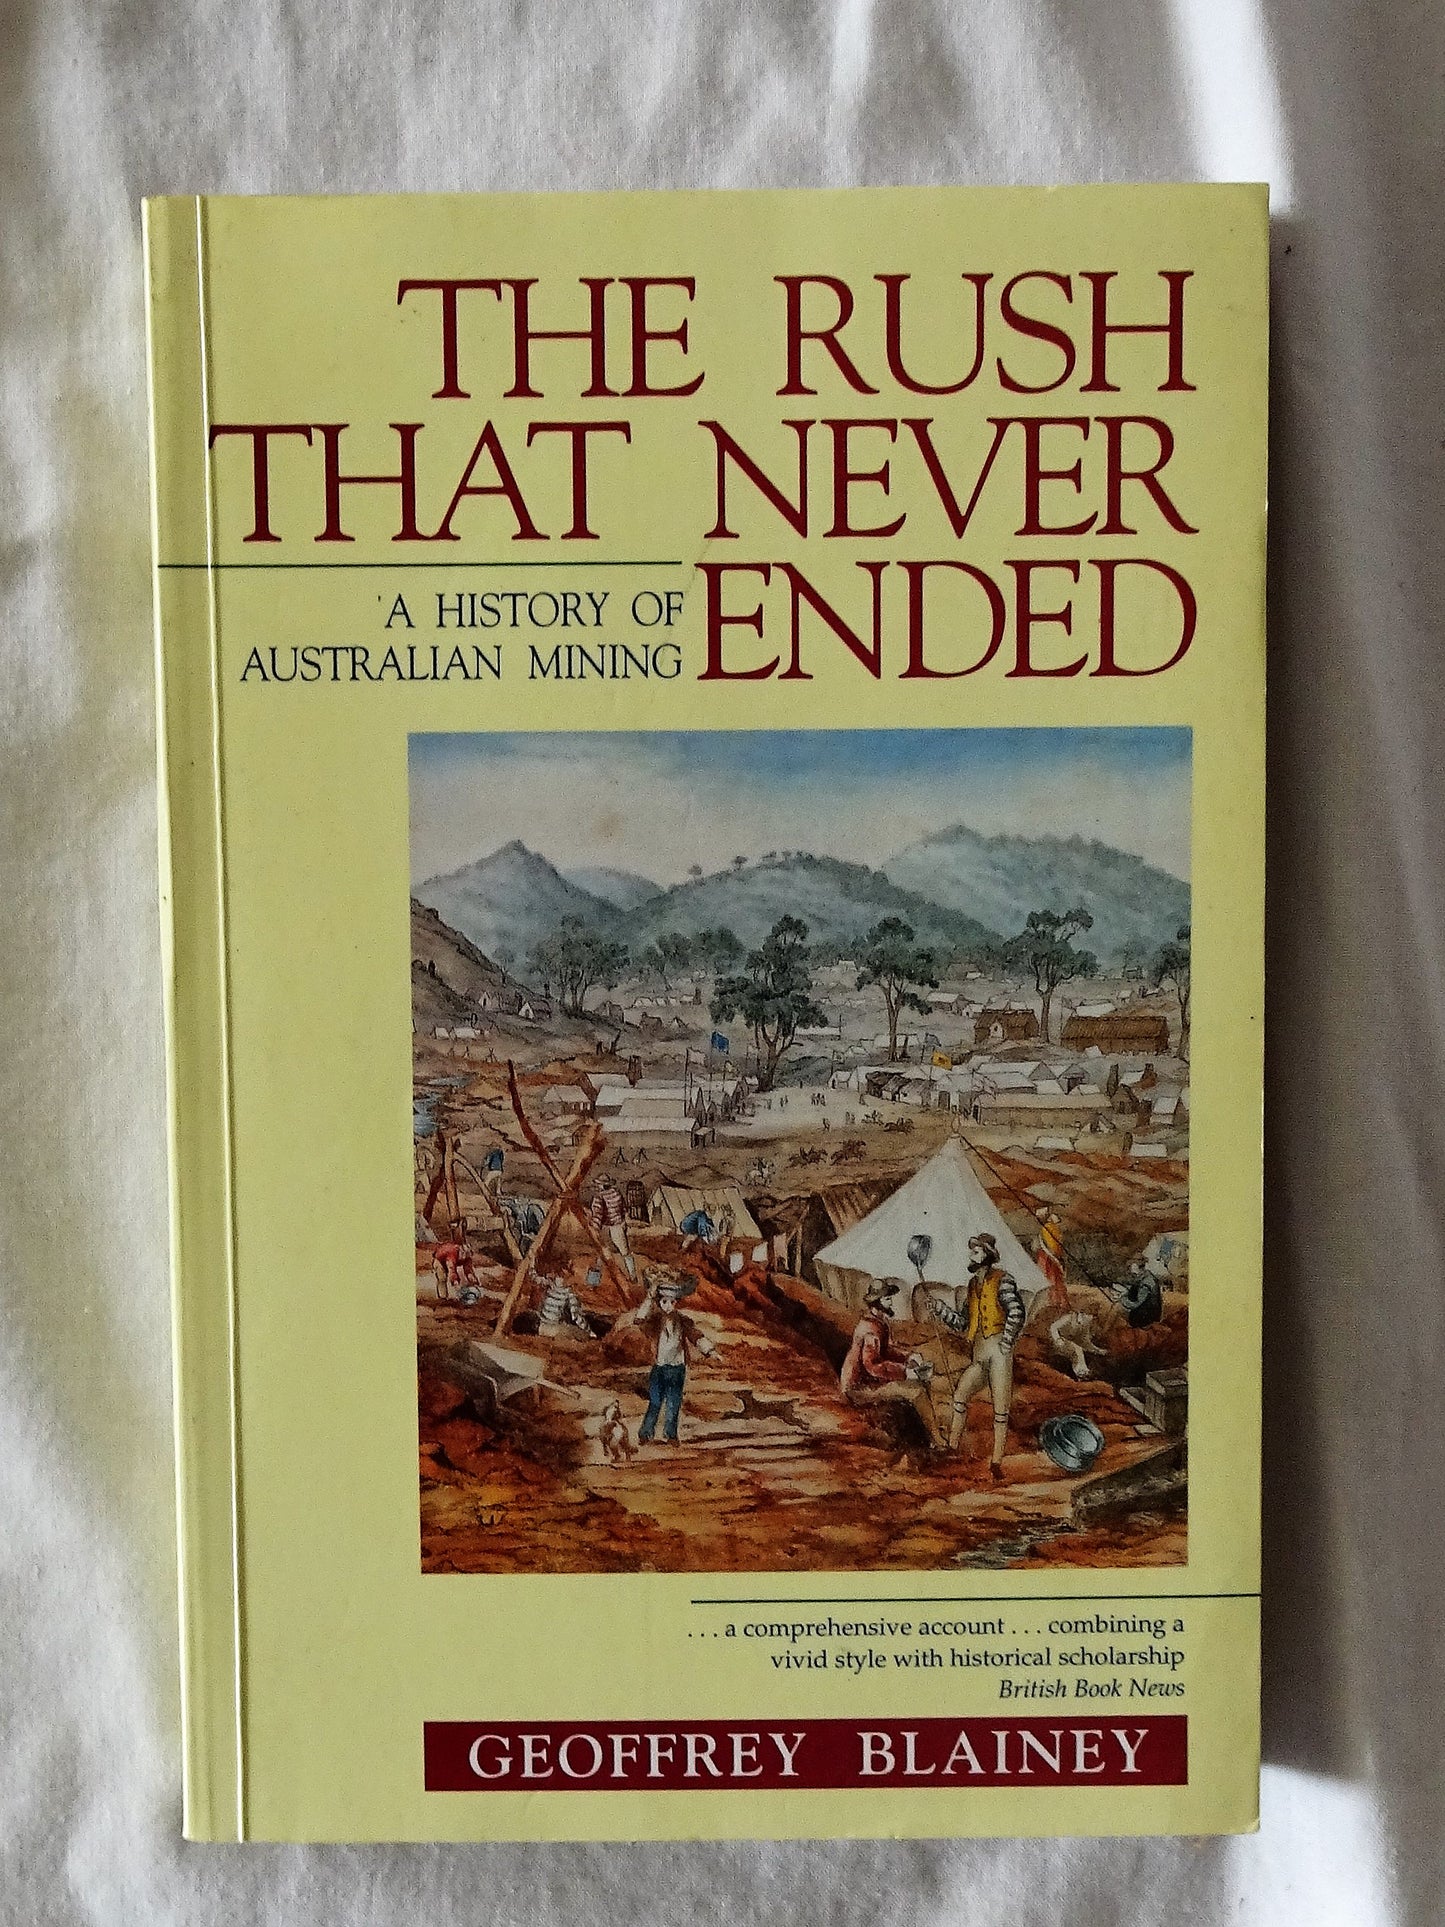 The Rush That Never Ended by Geoffrey Blainey